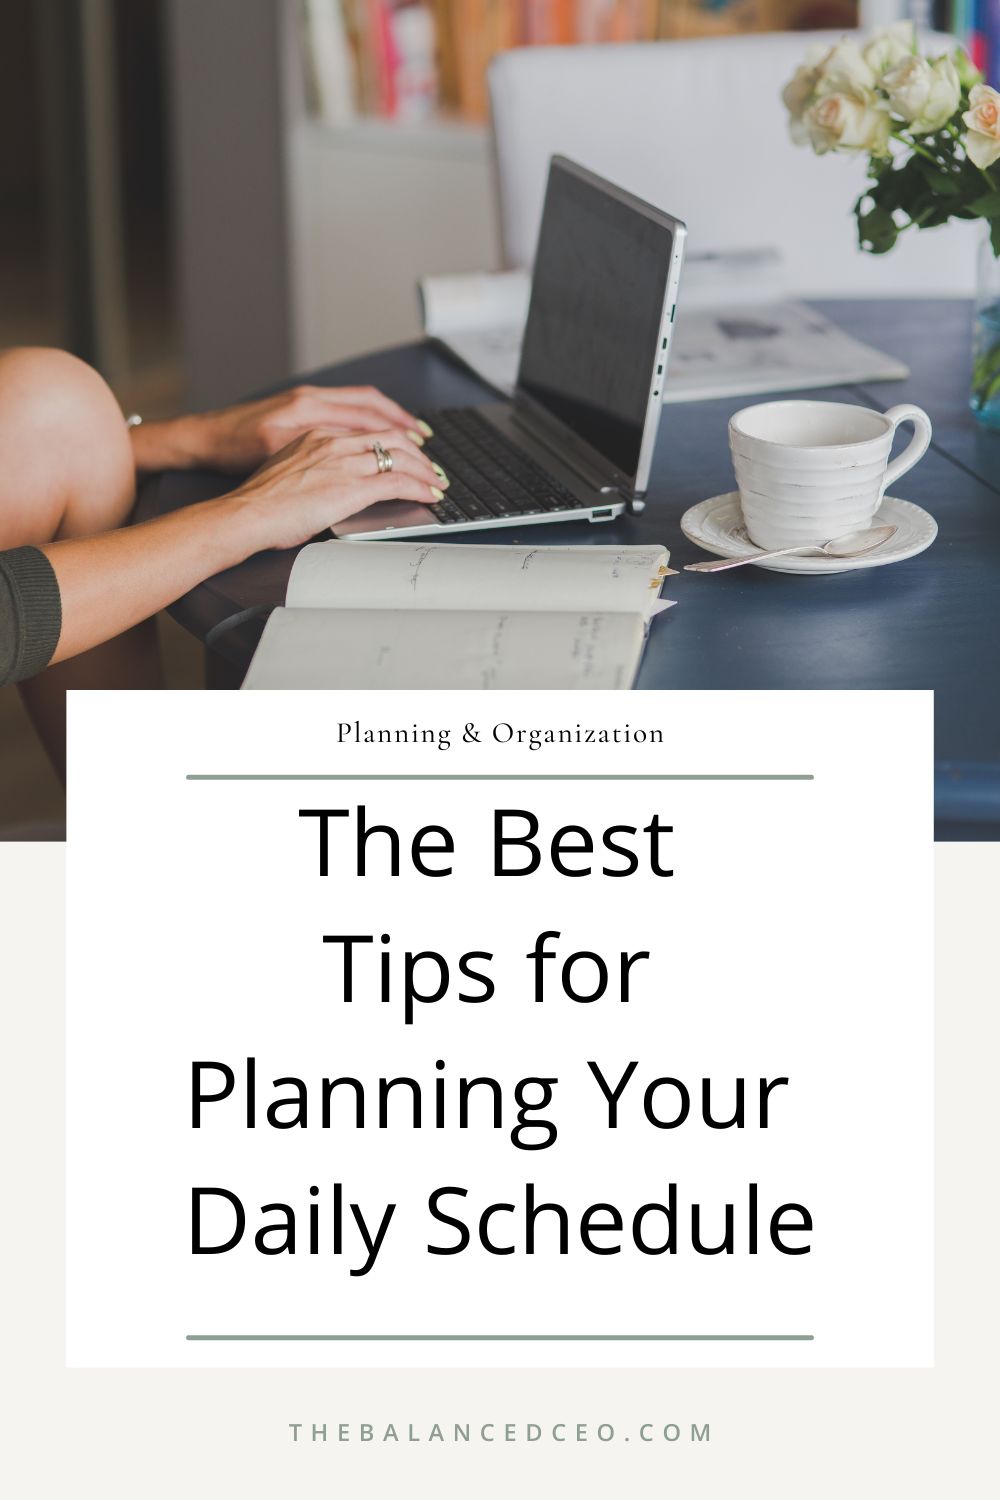 The Best Tips for Planning Your Daily Schedule